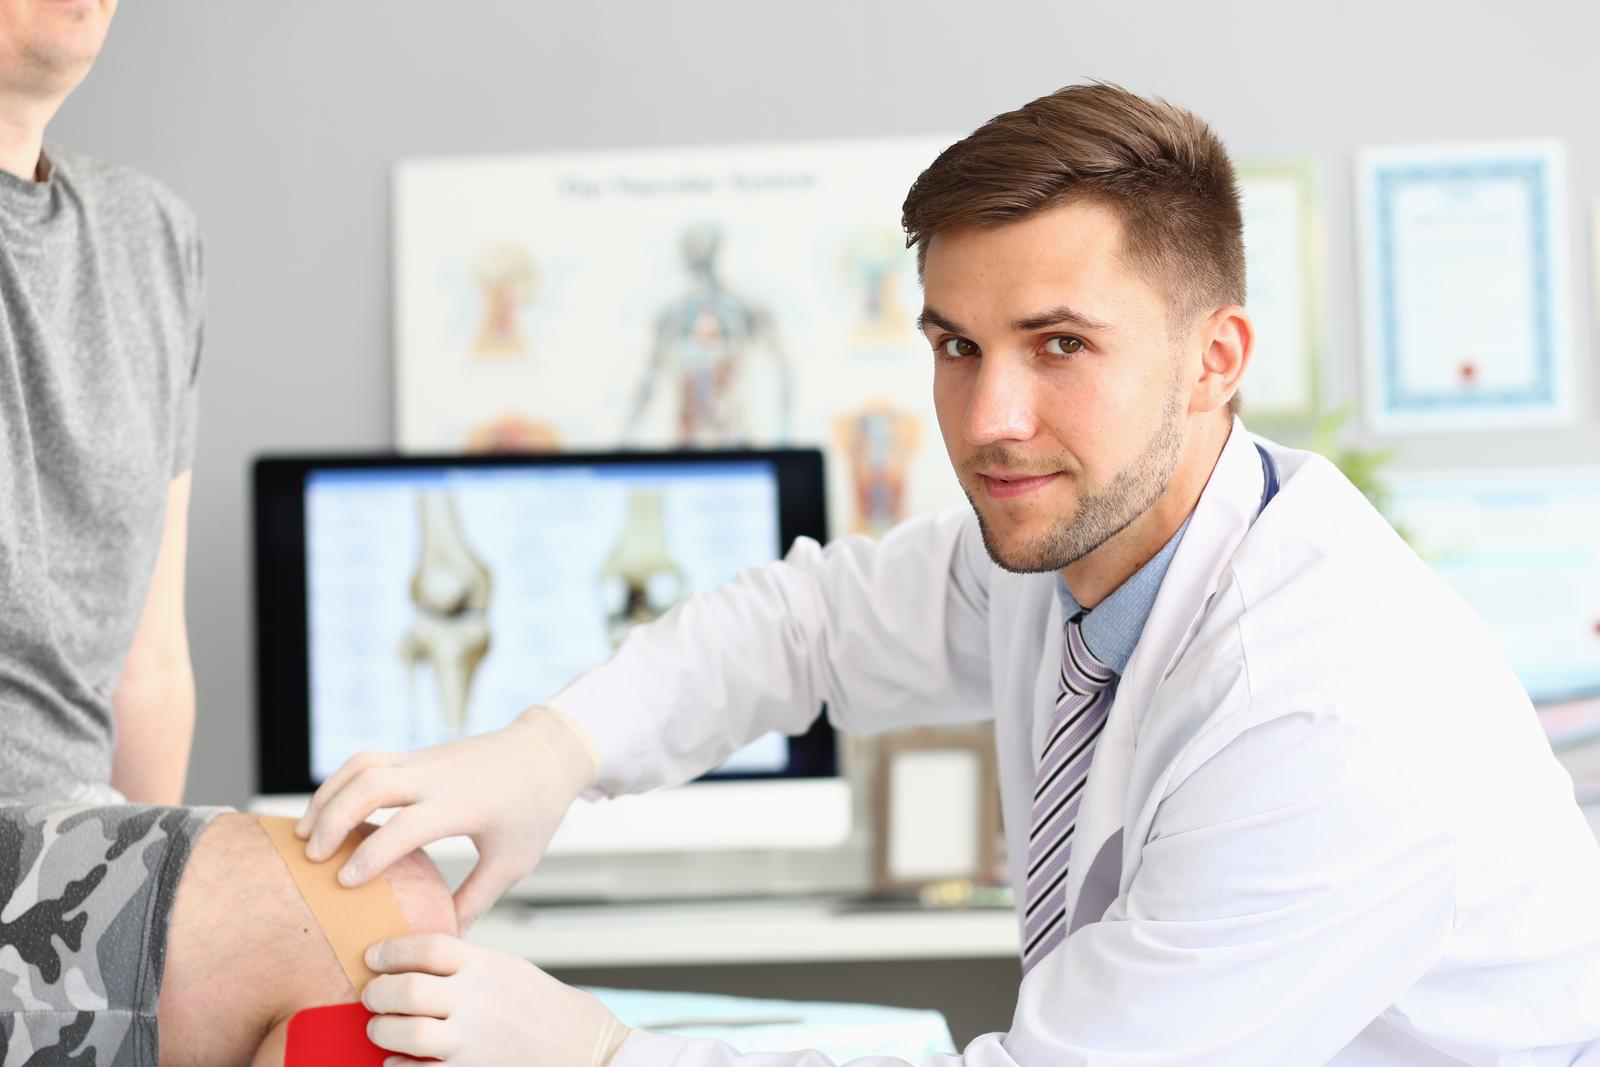 How chiropractic adjustments North York differ from conventional treatments